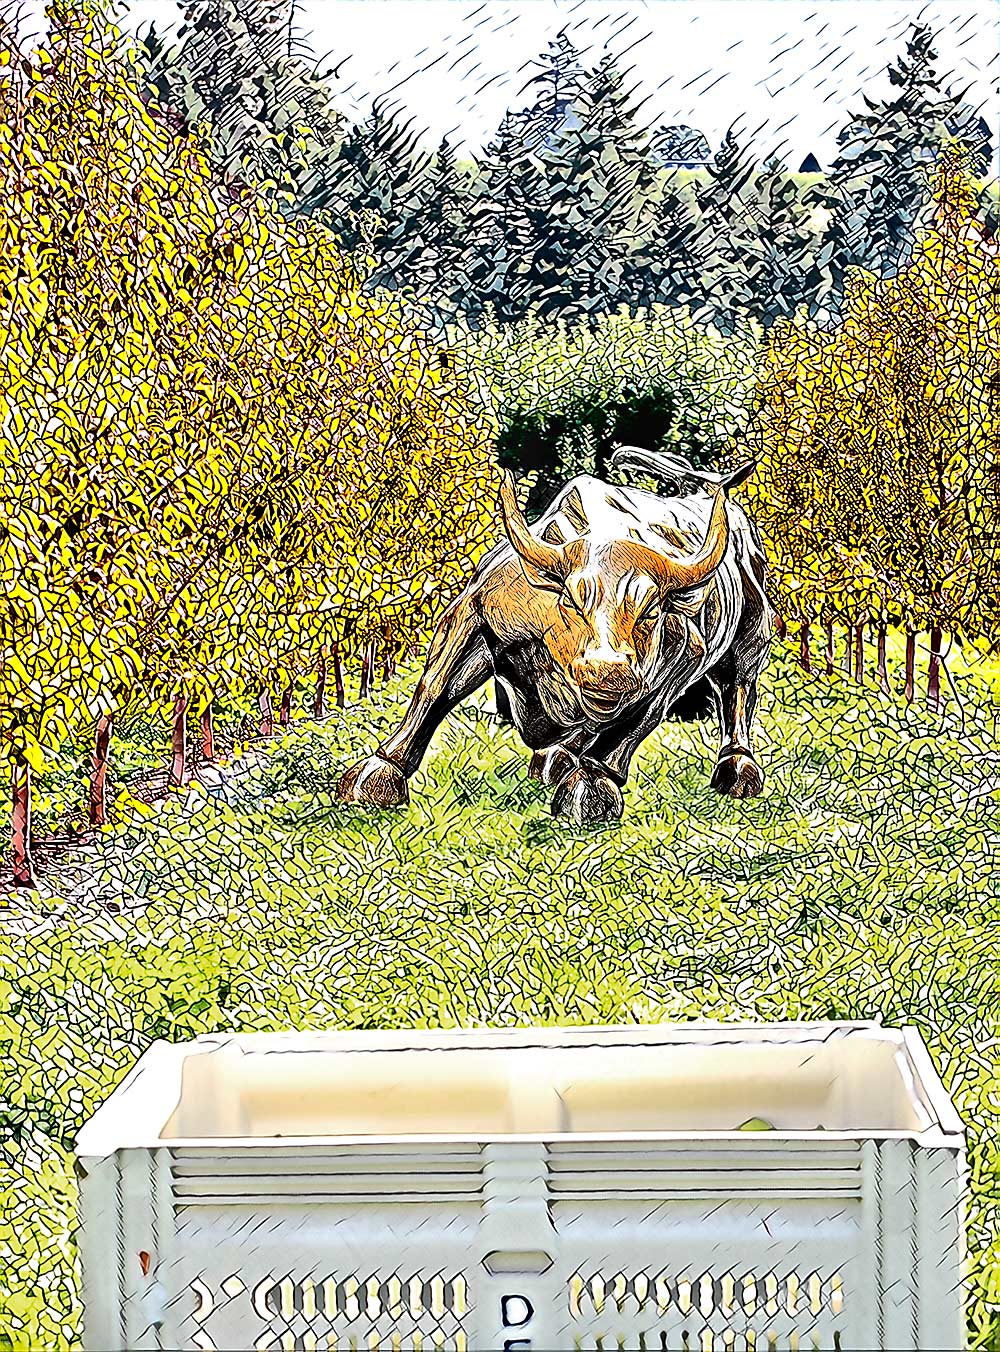 Investors looking for farmland can now find bullish opportunities in the orchard industry through online platforms that match investors with growers. (TJ Mullinax/Good Fruit Grower illustration)